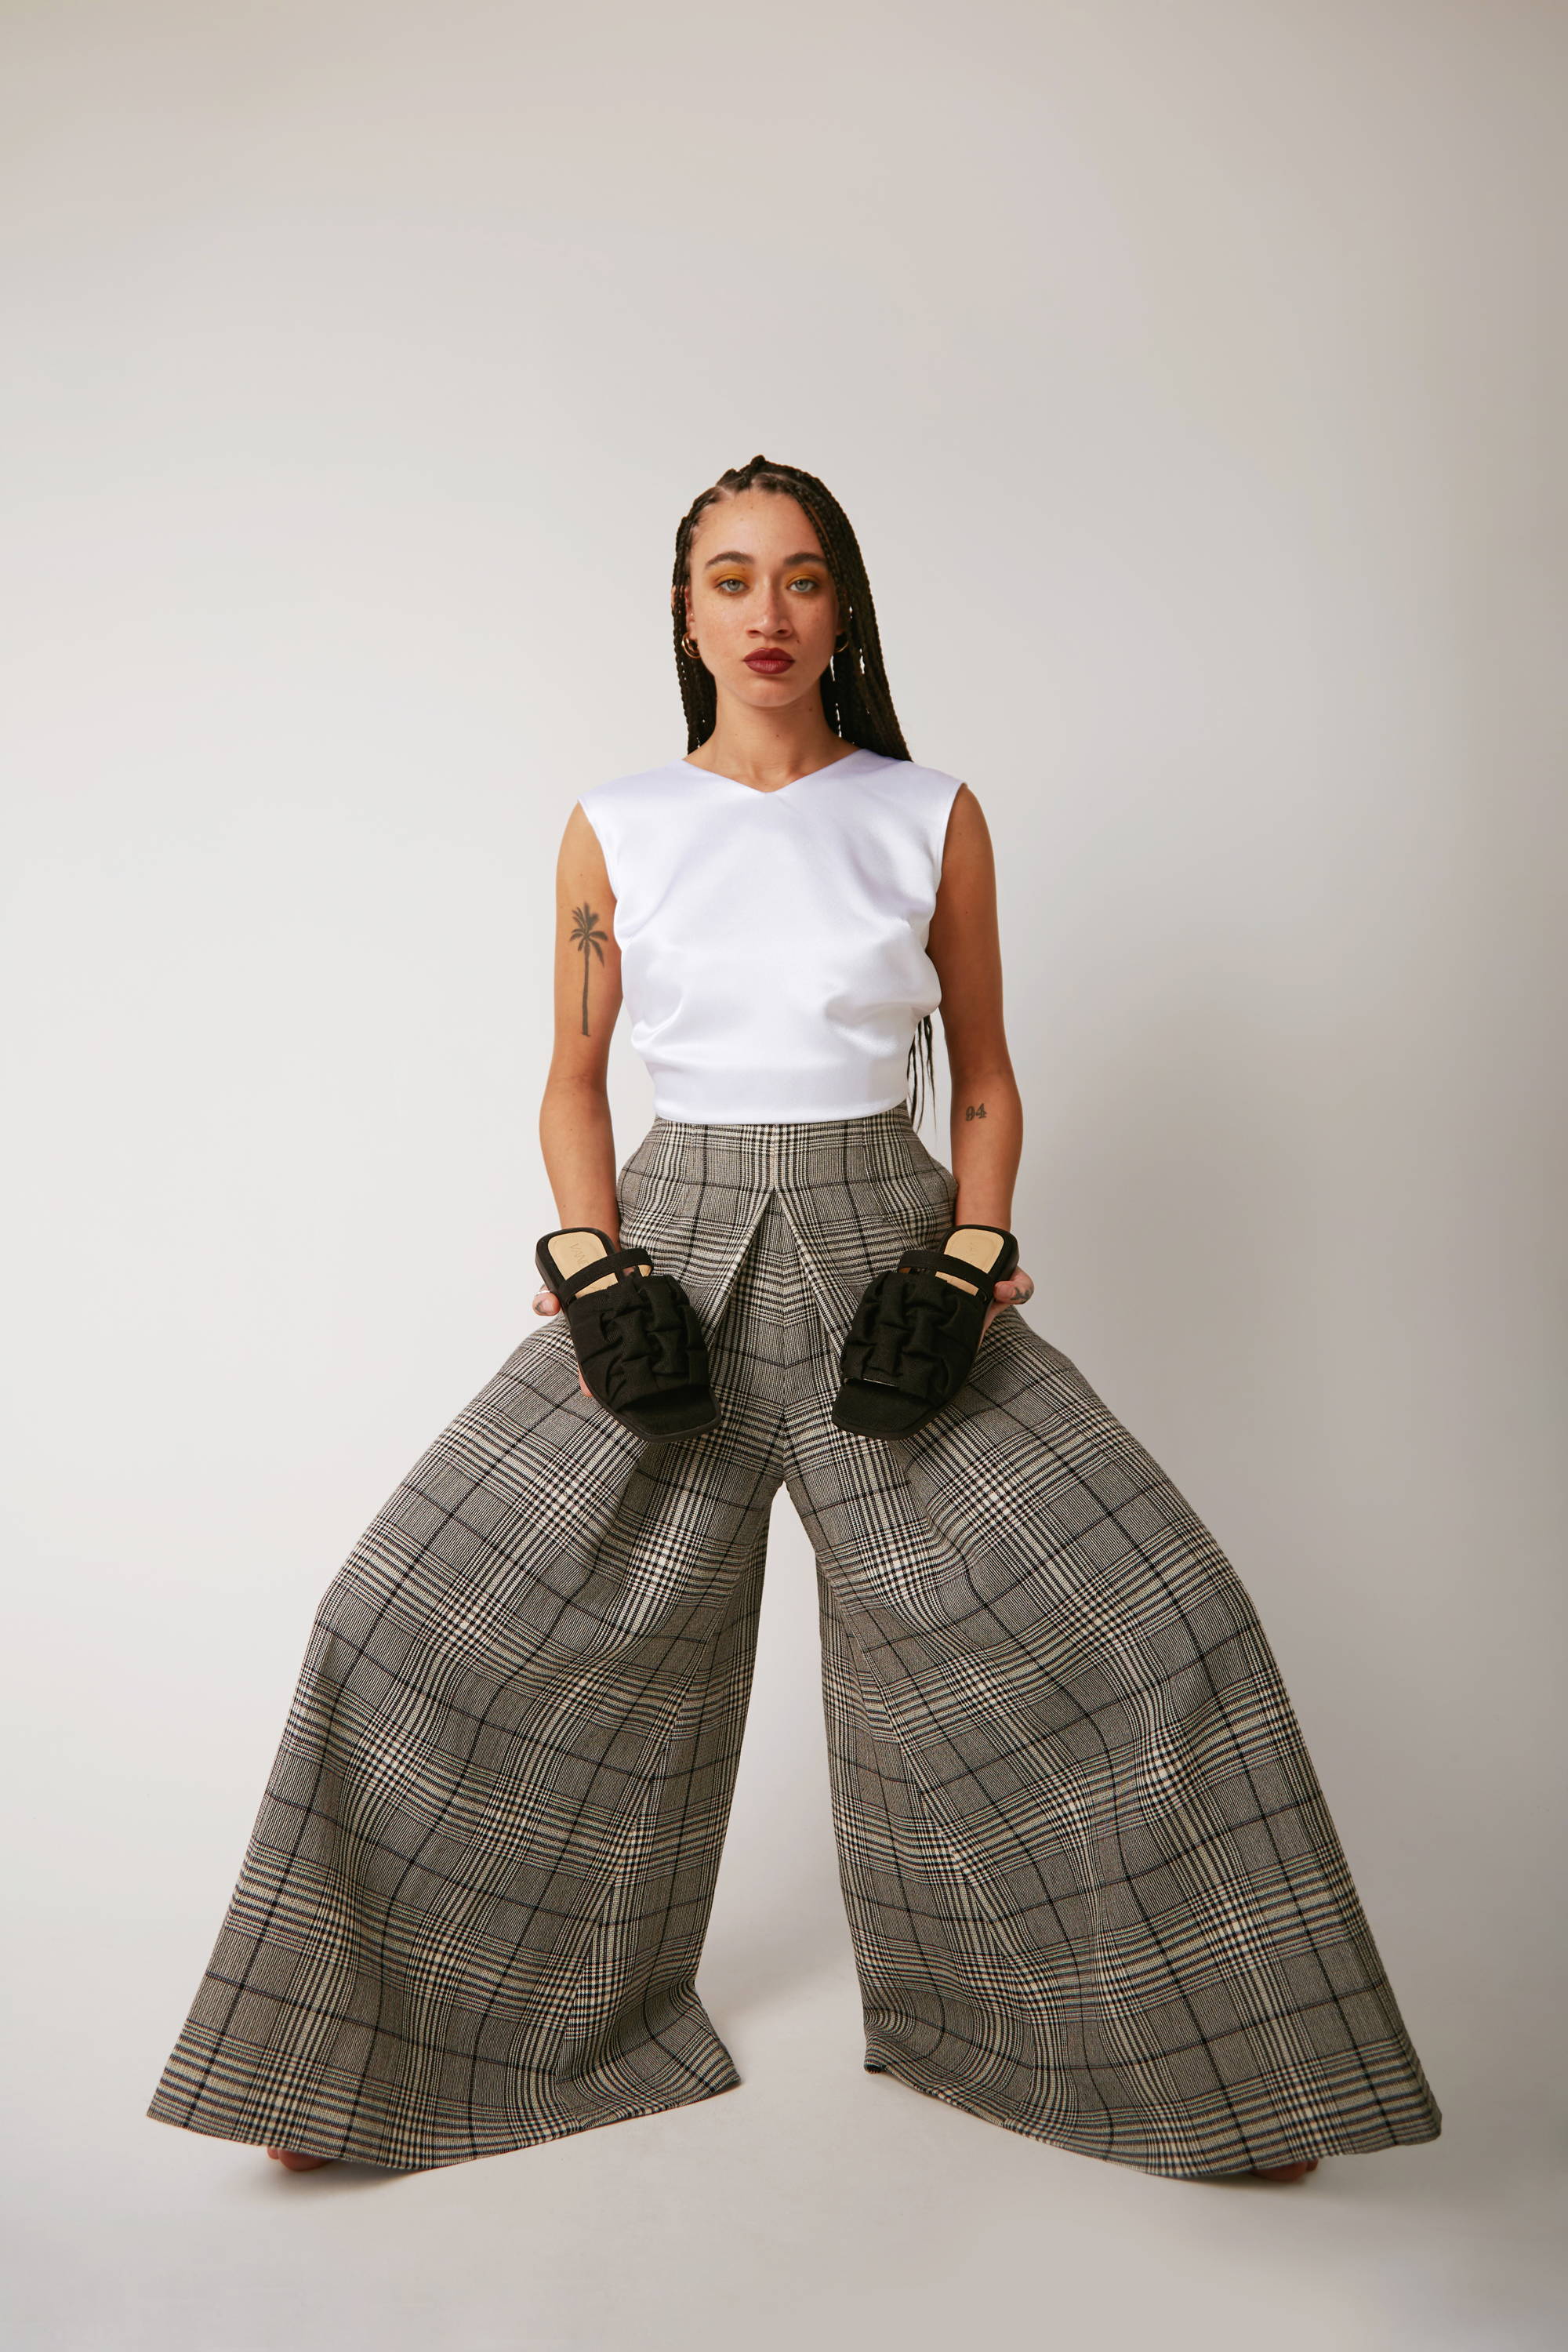 Vandrelaar vegan Simone sandal in black linen styled on model with wide legged checkered wool trousers and a satin white top